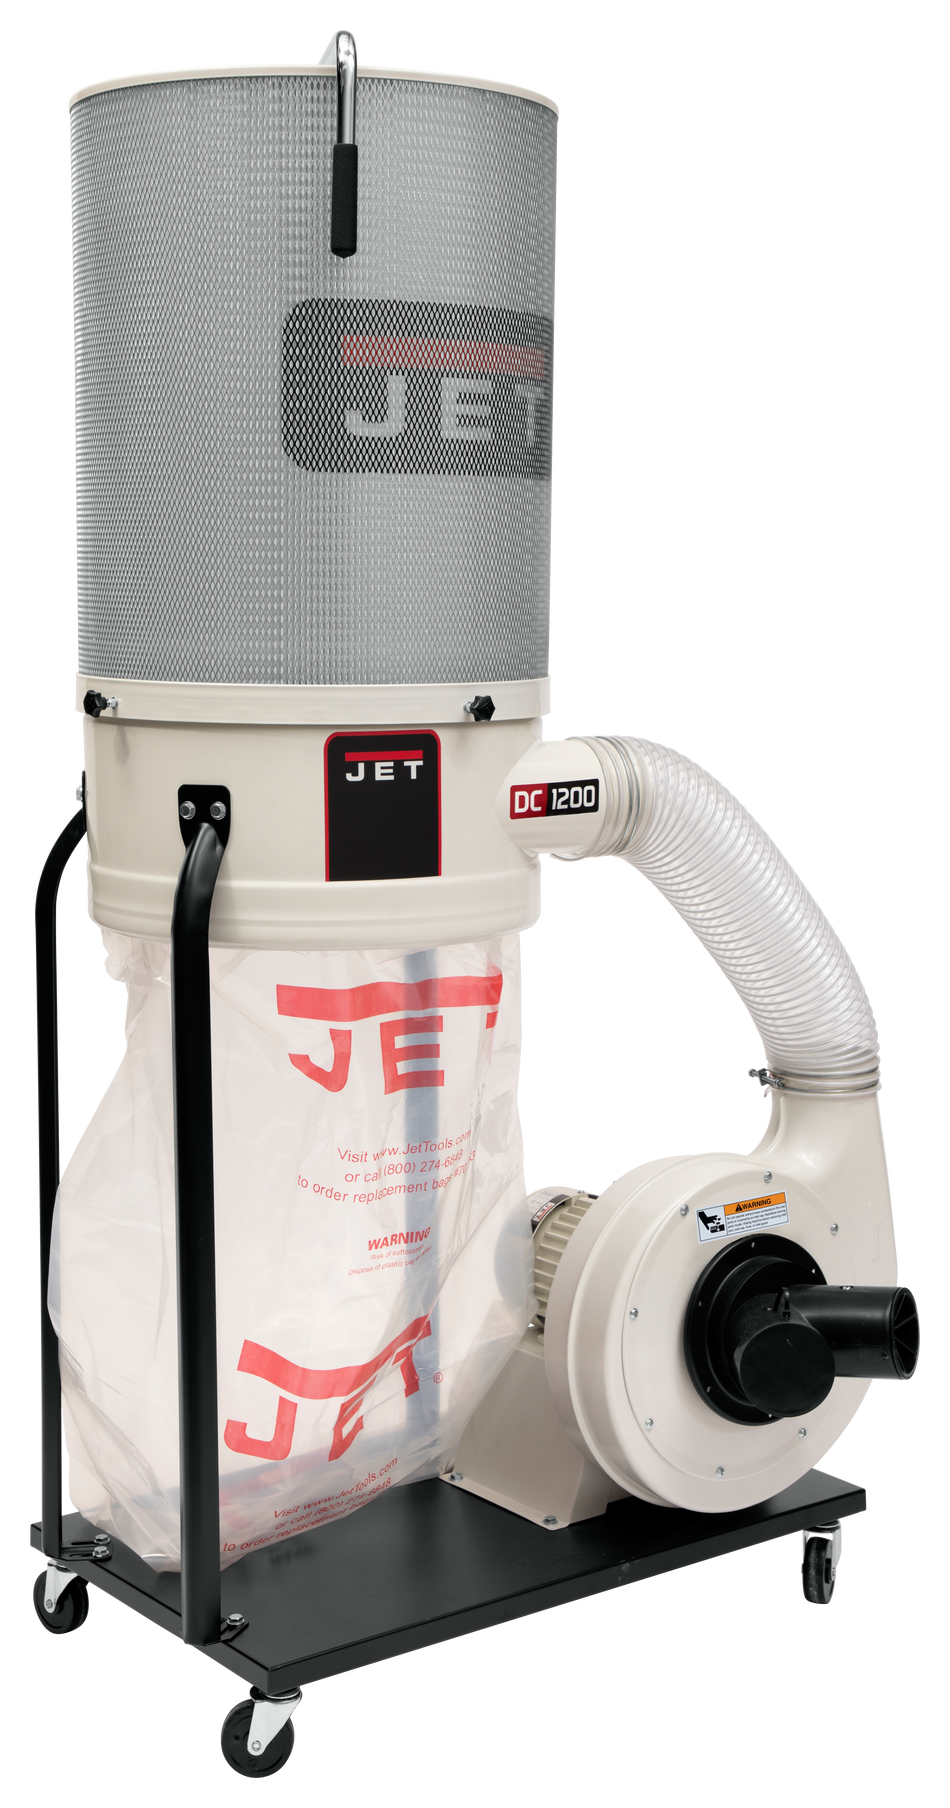 JET DC-1200VX-CK1 Dust Collector, 2HP, 2-Micron Canister Kit